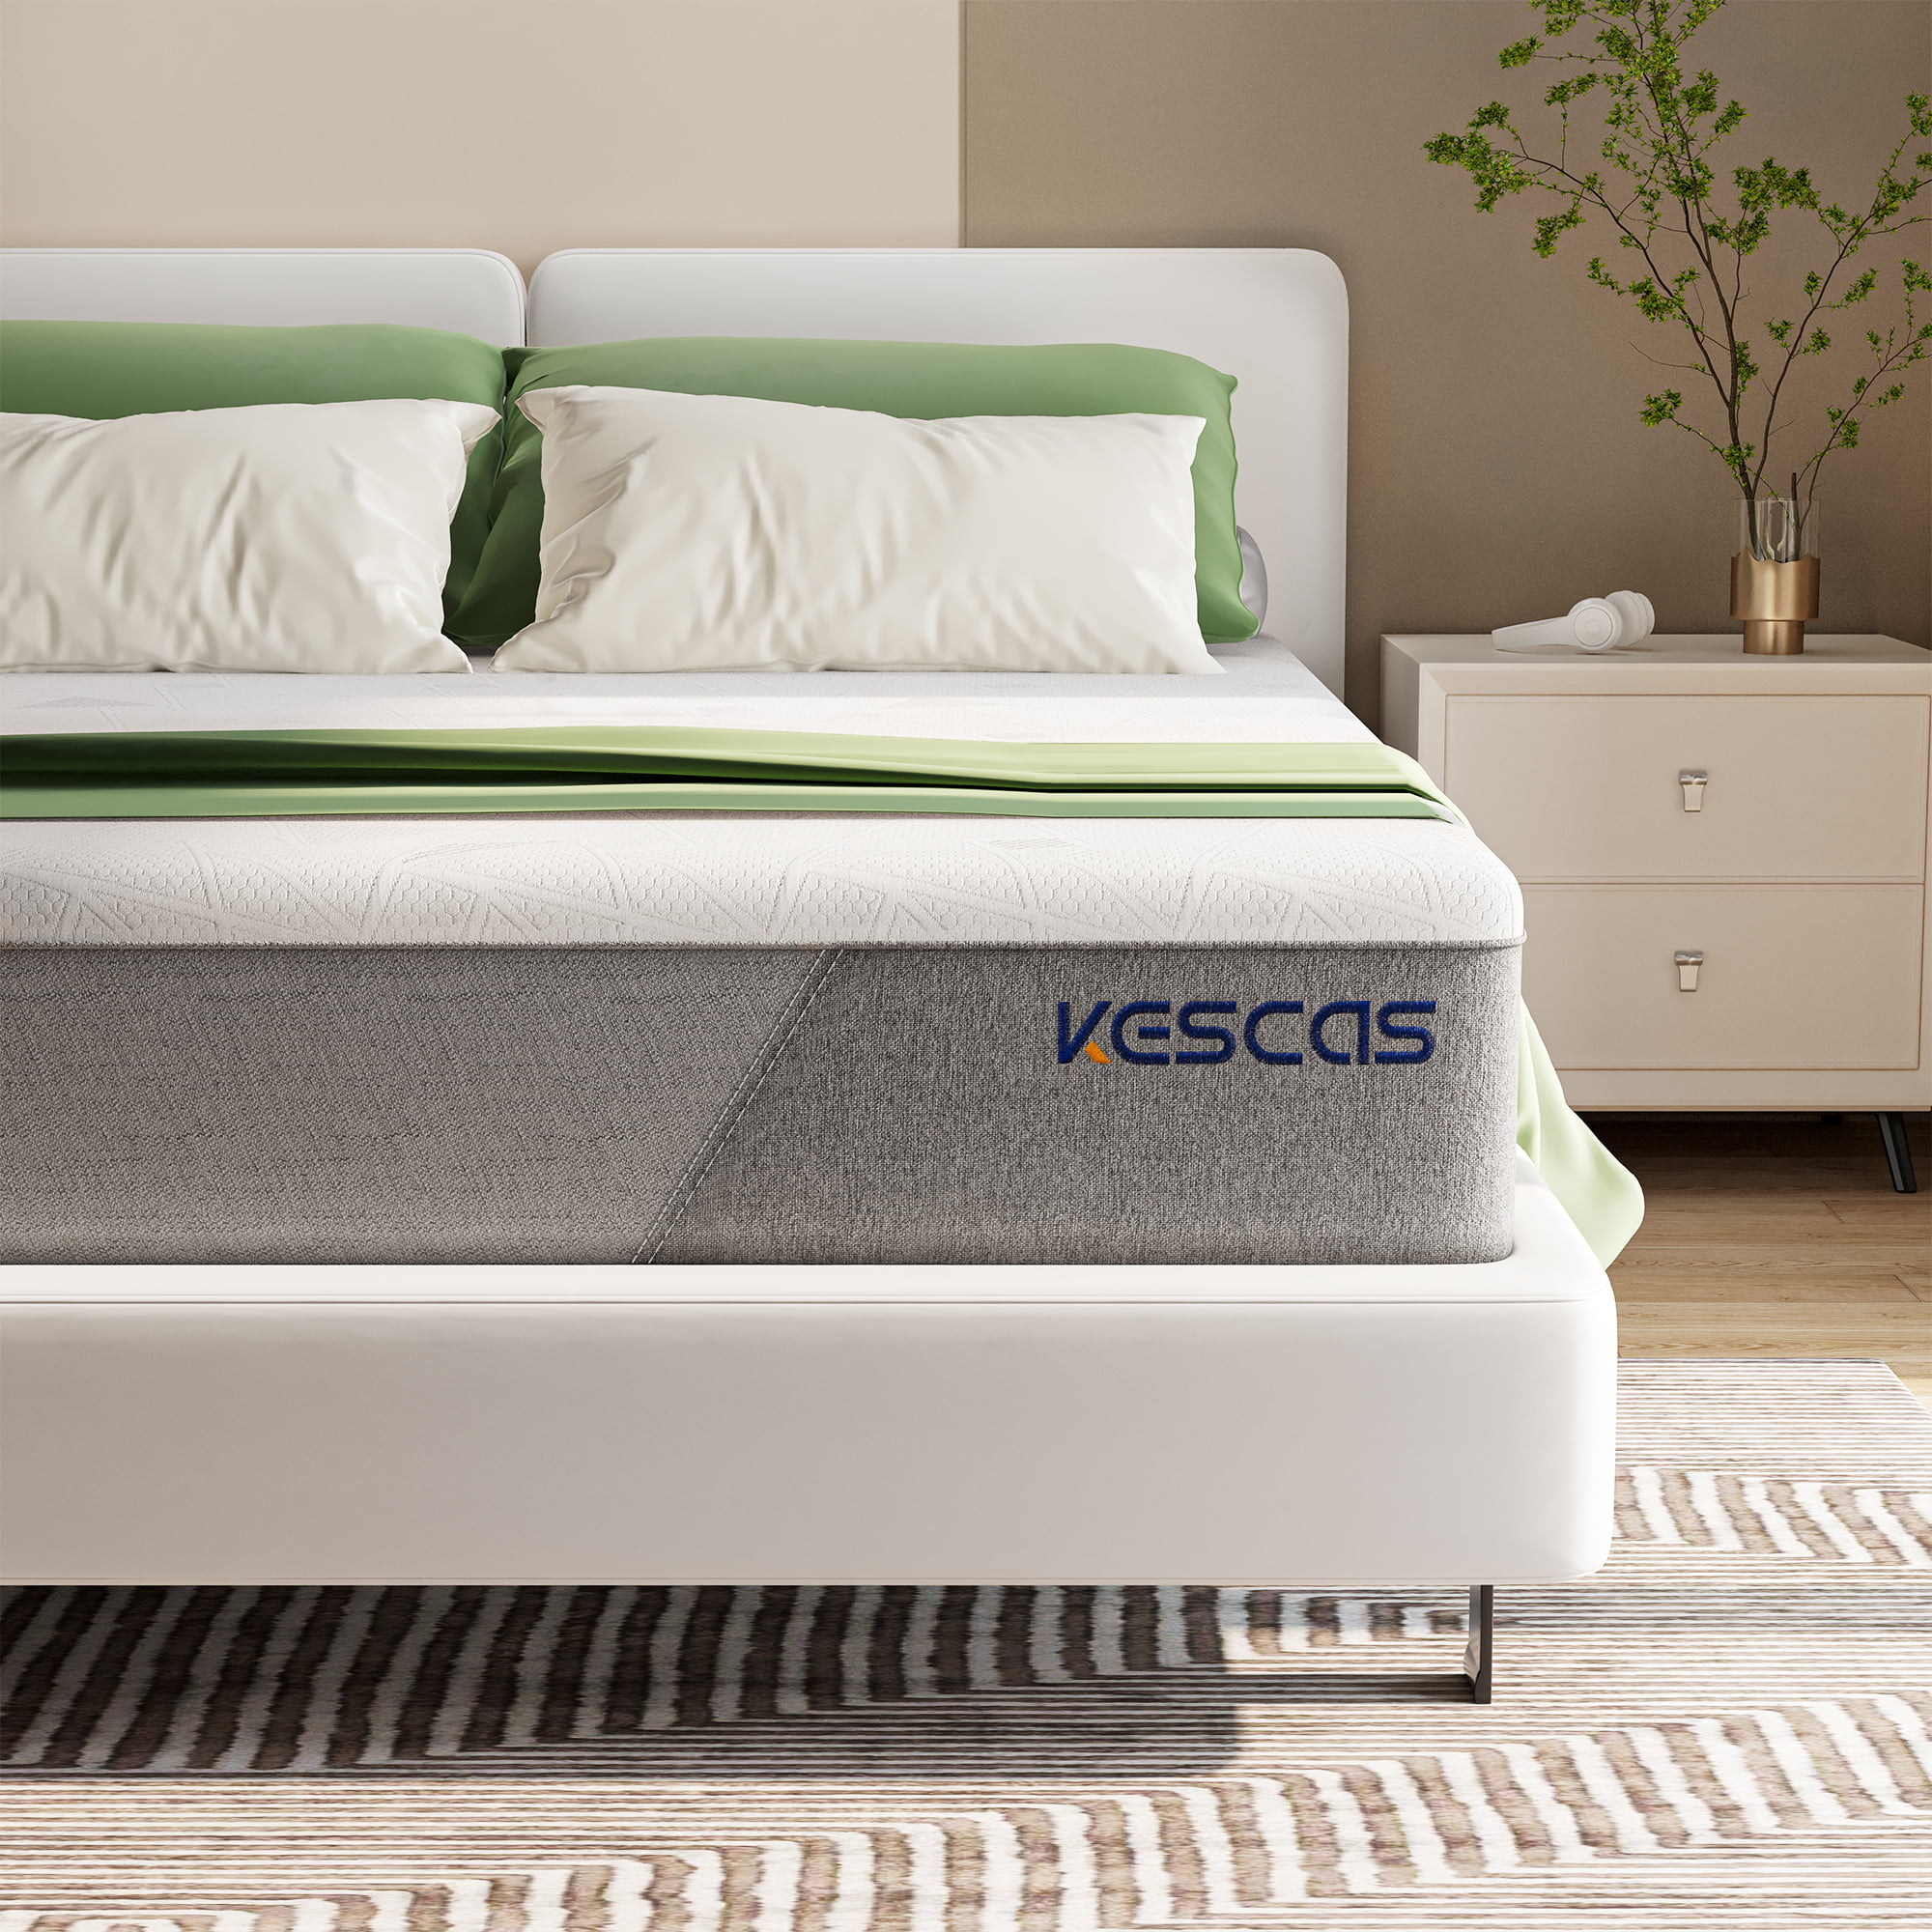 100 Nights Trial Kescas Twin Mattress 10 Years Support Medium Firm Mattress in a Box Designed to Improve Back Pain Relief and Deep Sleep 8 Inch Cool Breathable Memory Foam Hybrid Mattress Single